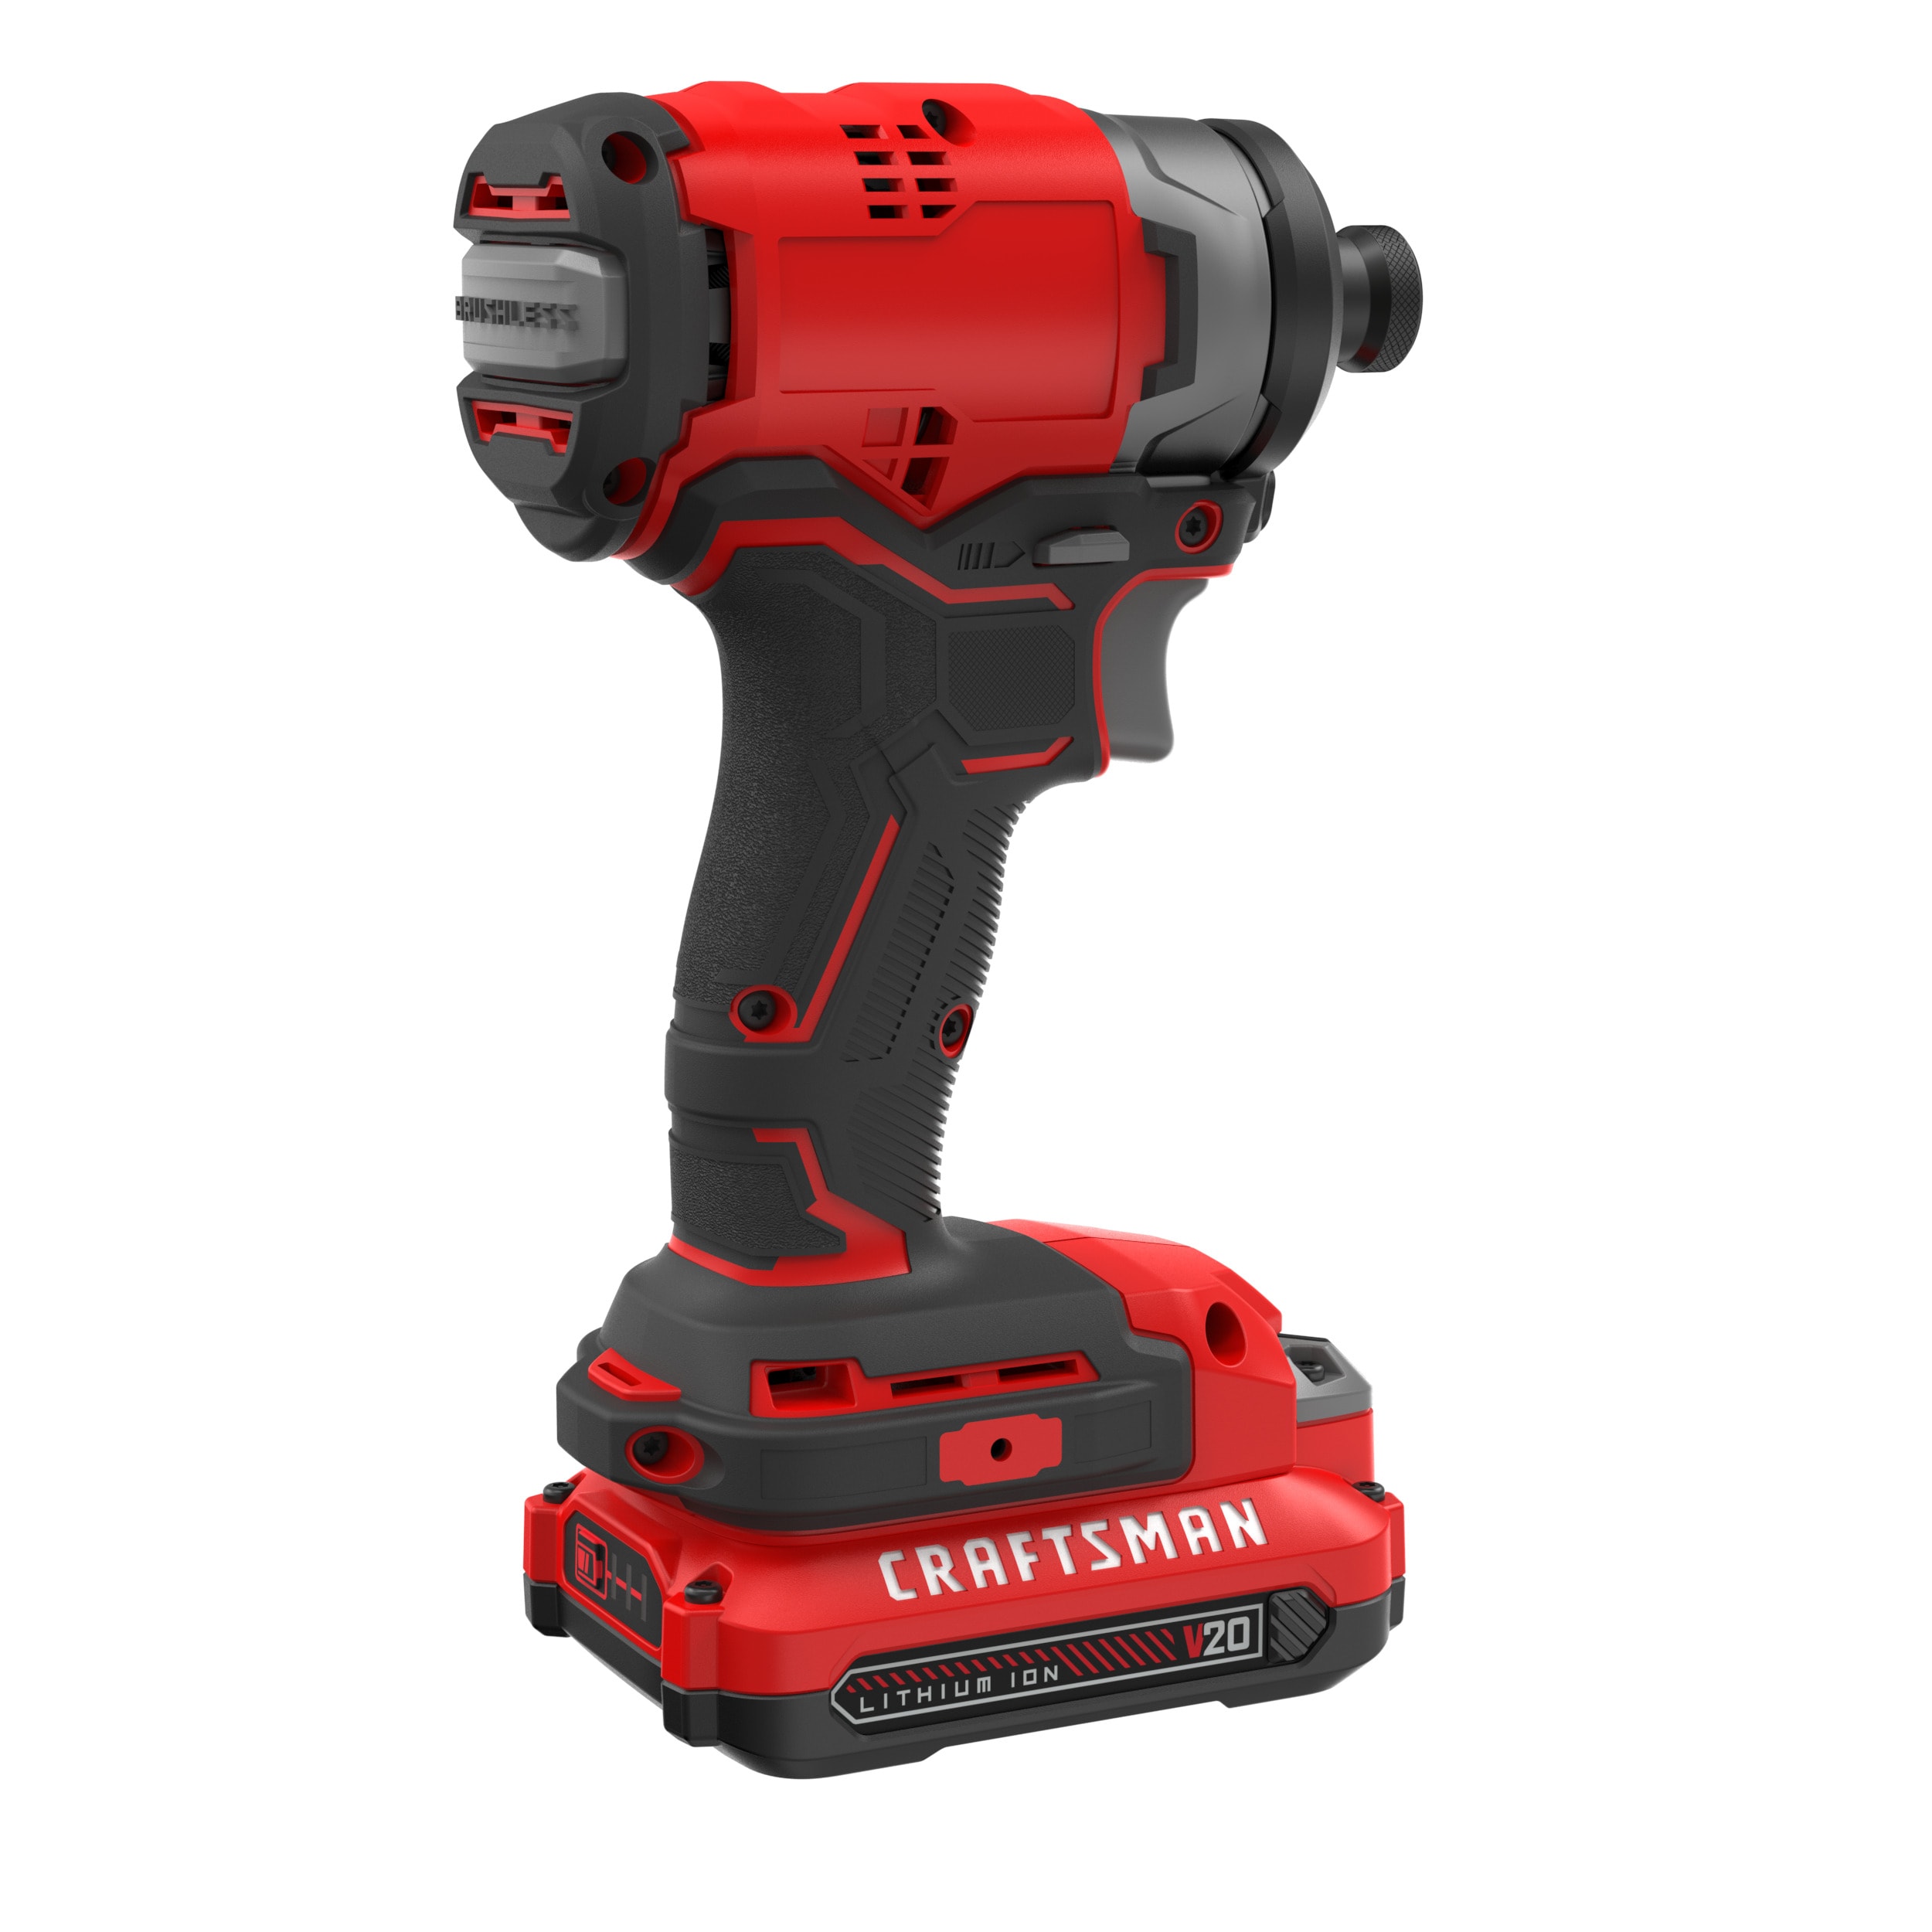 CRAFTSMAN V20 20-volt Max Variable Speed 1/2-in Drive, 54% OFF